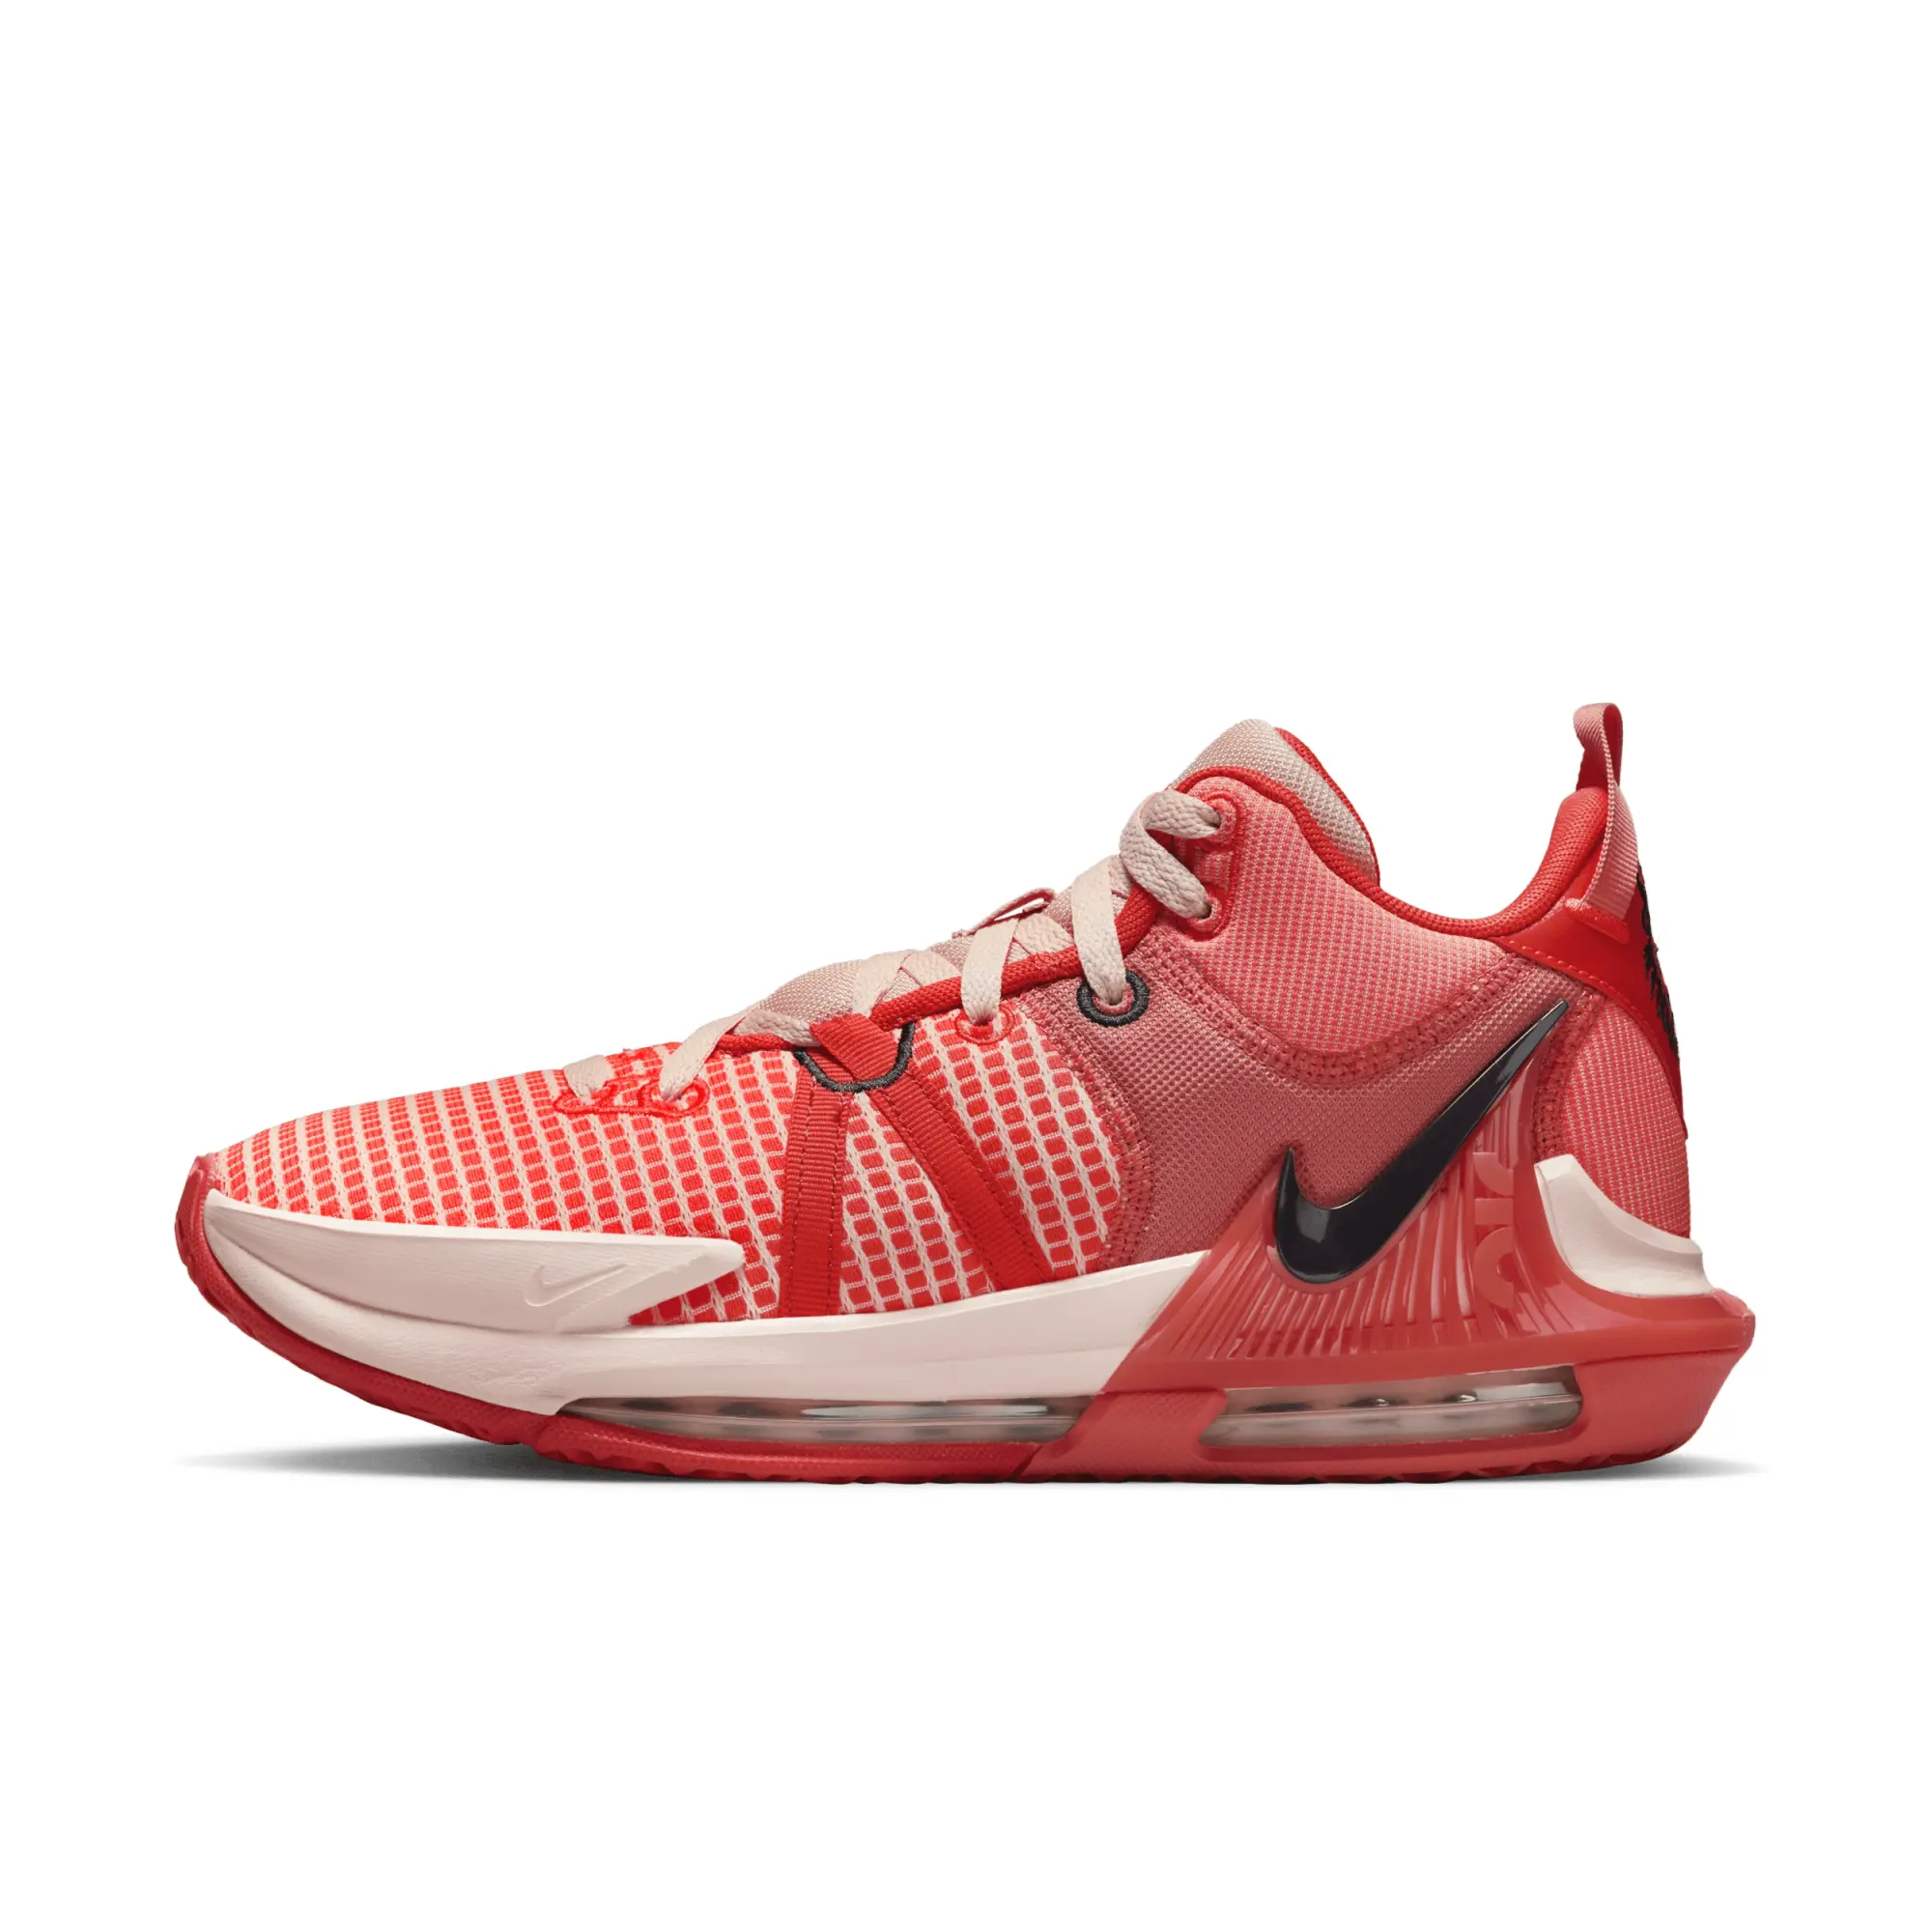 Nike LeBron Witness 7 Basketball Shoes - Red